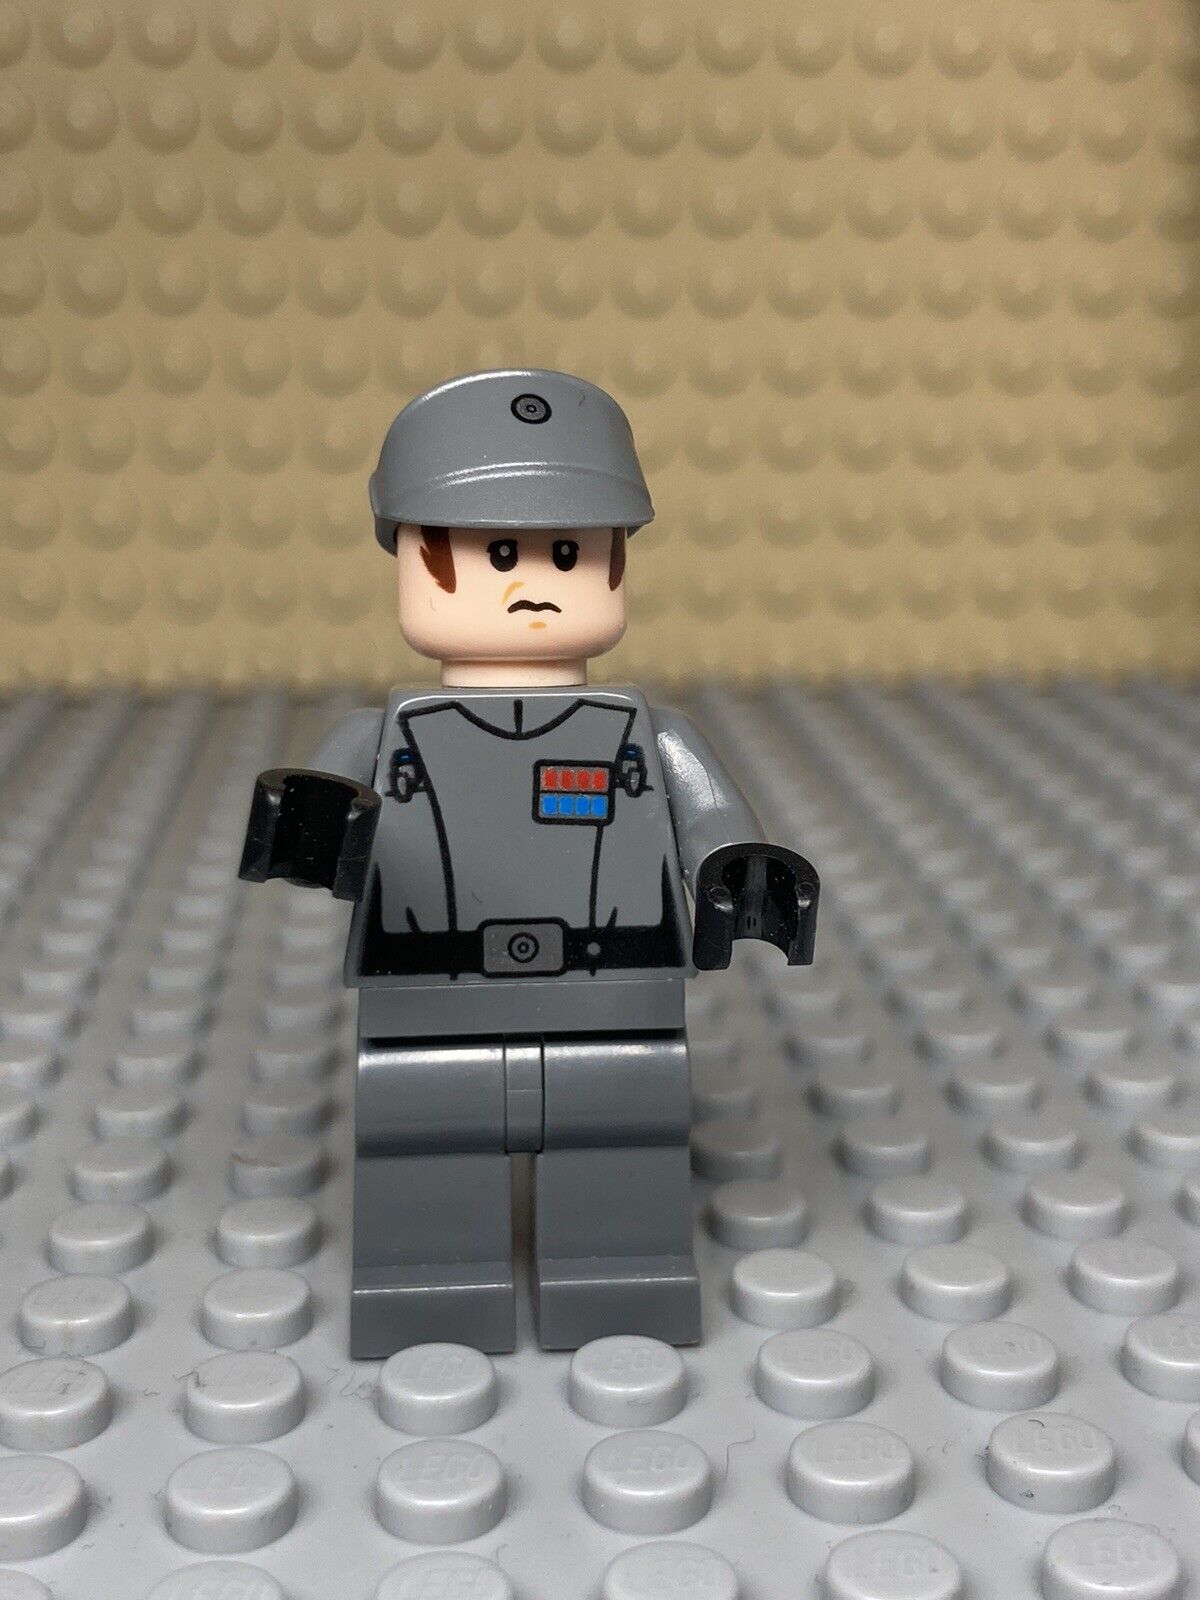 Lego Star Wars Imperial Officer Minifigure 75184 Authentic Genuine